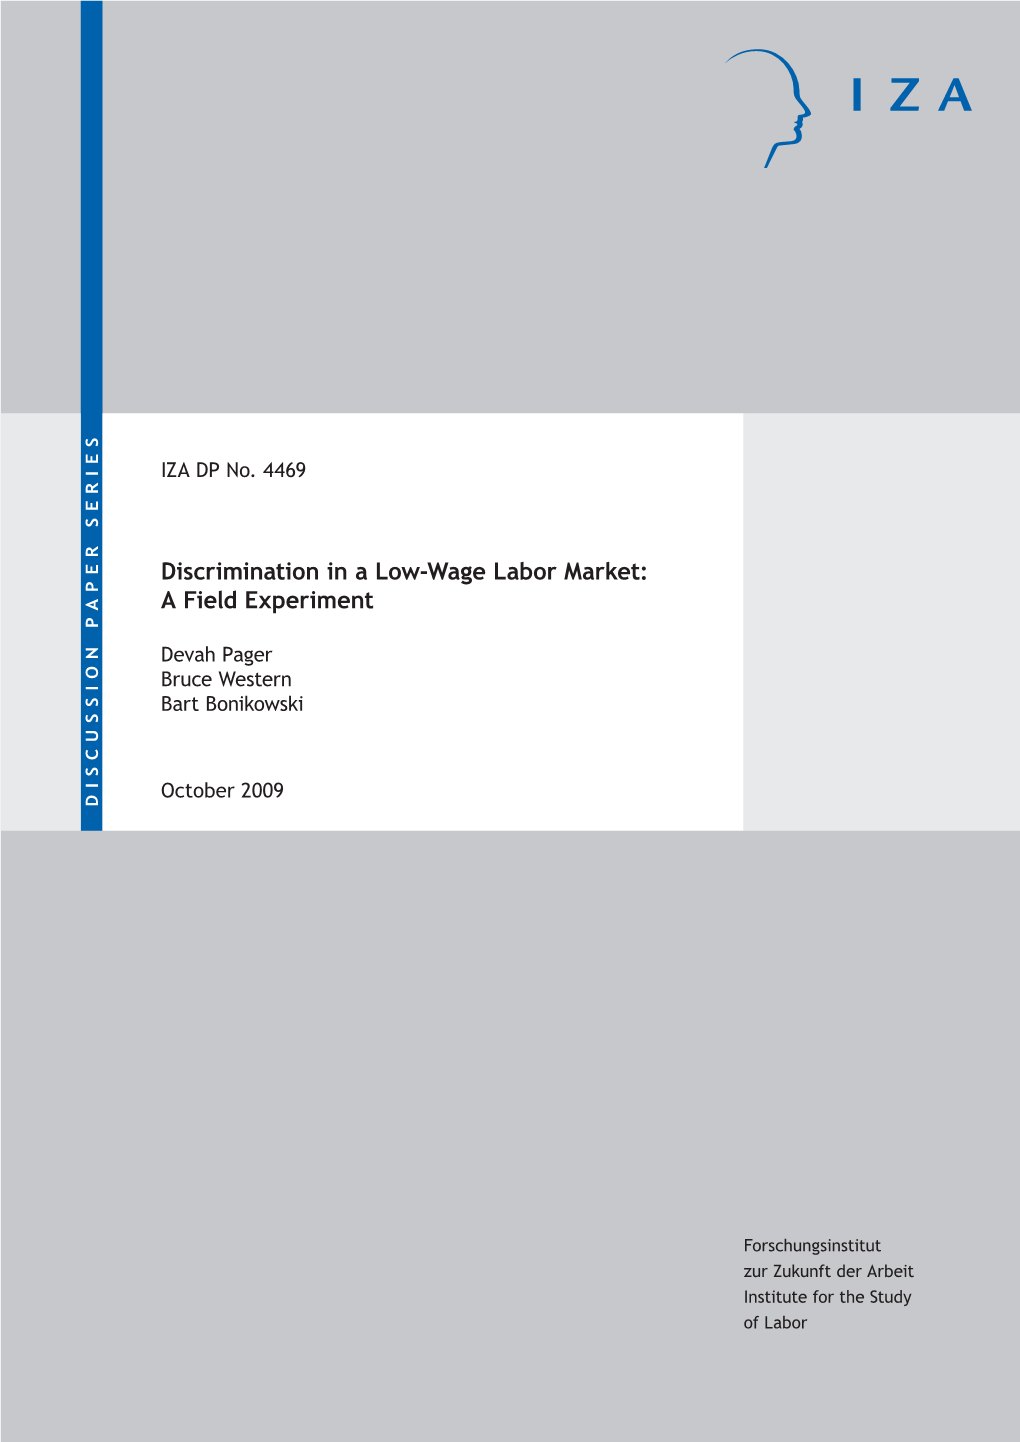 Discrimination in a Low-Wage Labor Market: a Field Experiment